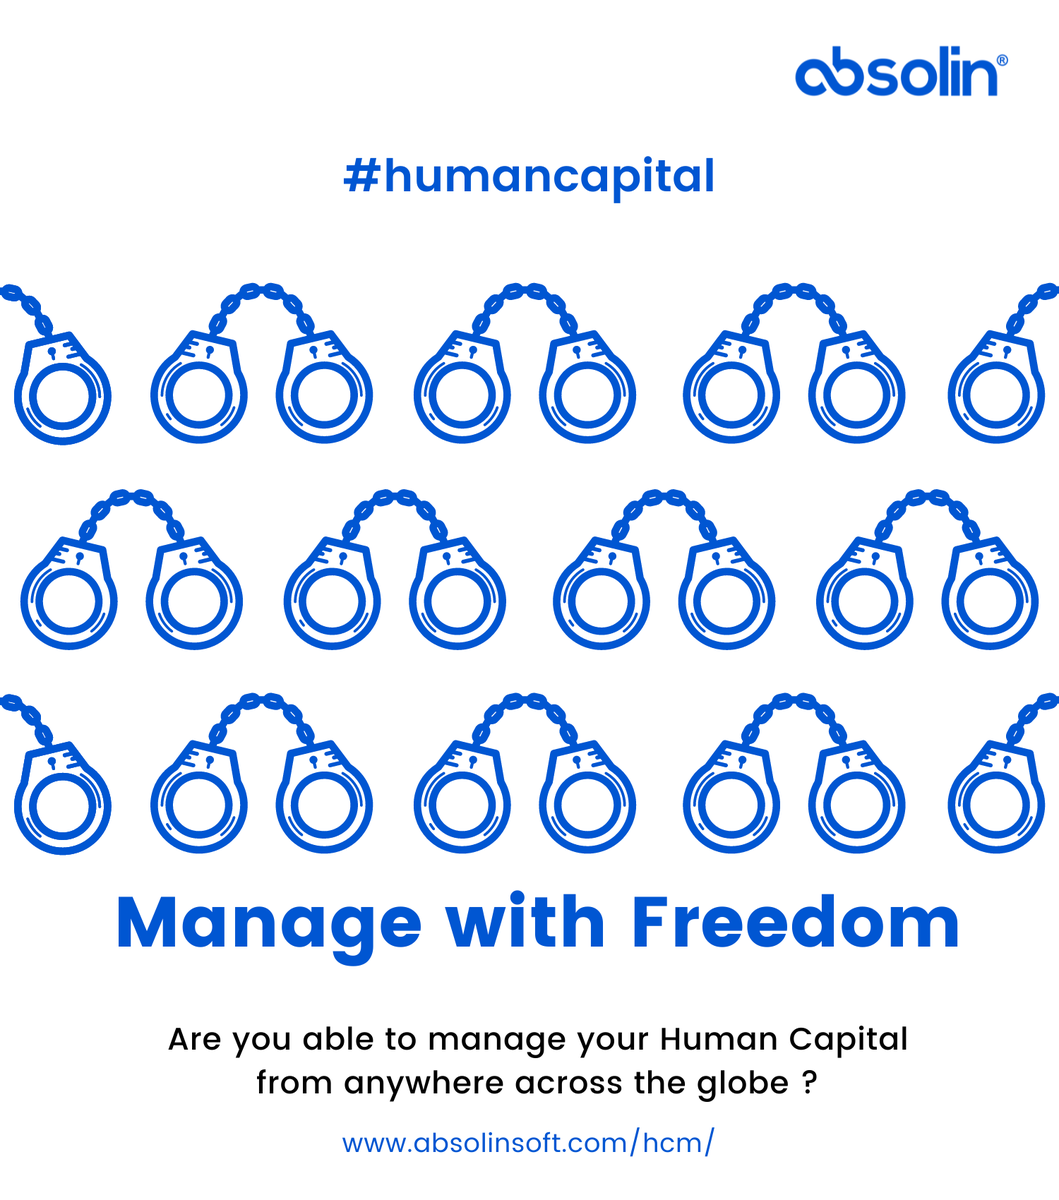 Remotely manage your human capital from any part of the world with ABSOLIN HCM.
#hcm #hcmtechnology #hcmcloud #hcmsoftware #hcmhr #hrhcm #cloudhcm #humancapital #humancapitalmanagement #cloud #hr #hrmanagement #employeemanagement #technologytransformation #technologysolutions